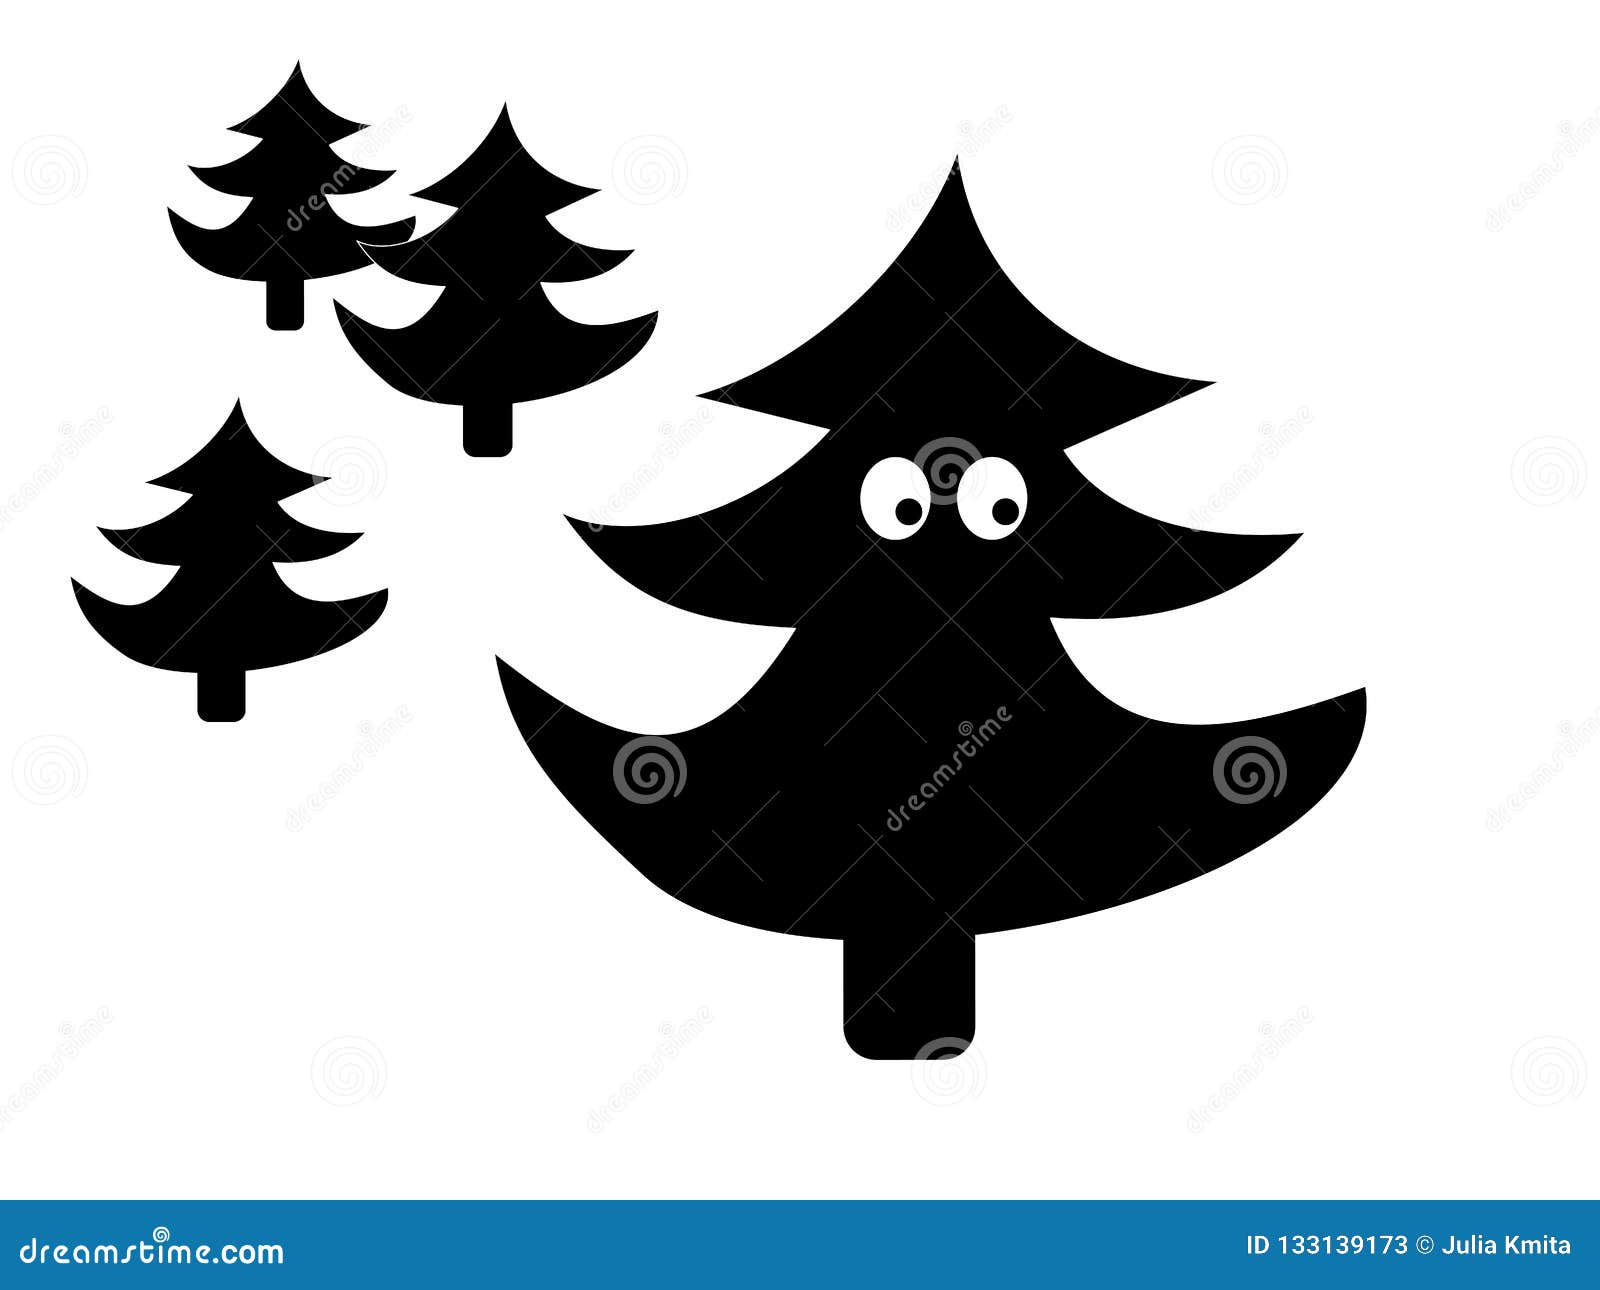 Funny fir tree silhouette cartoon on white background